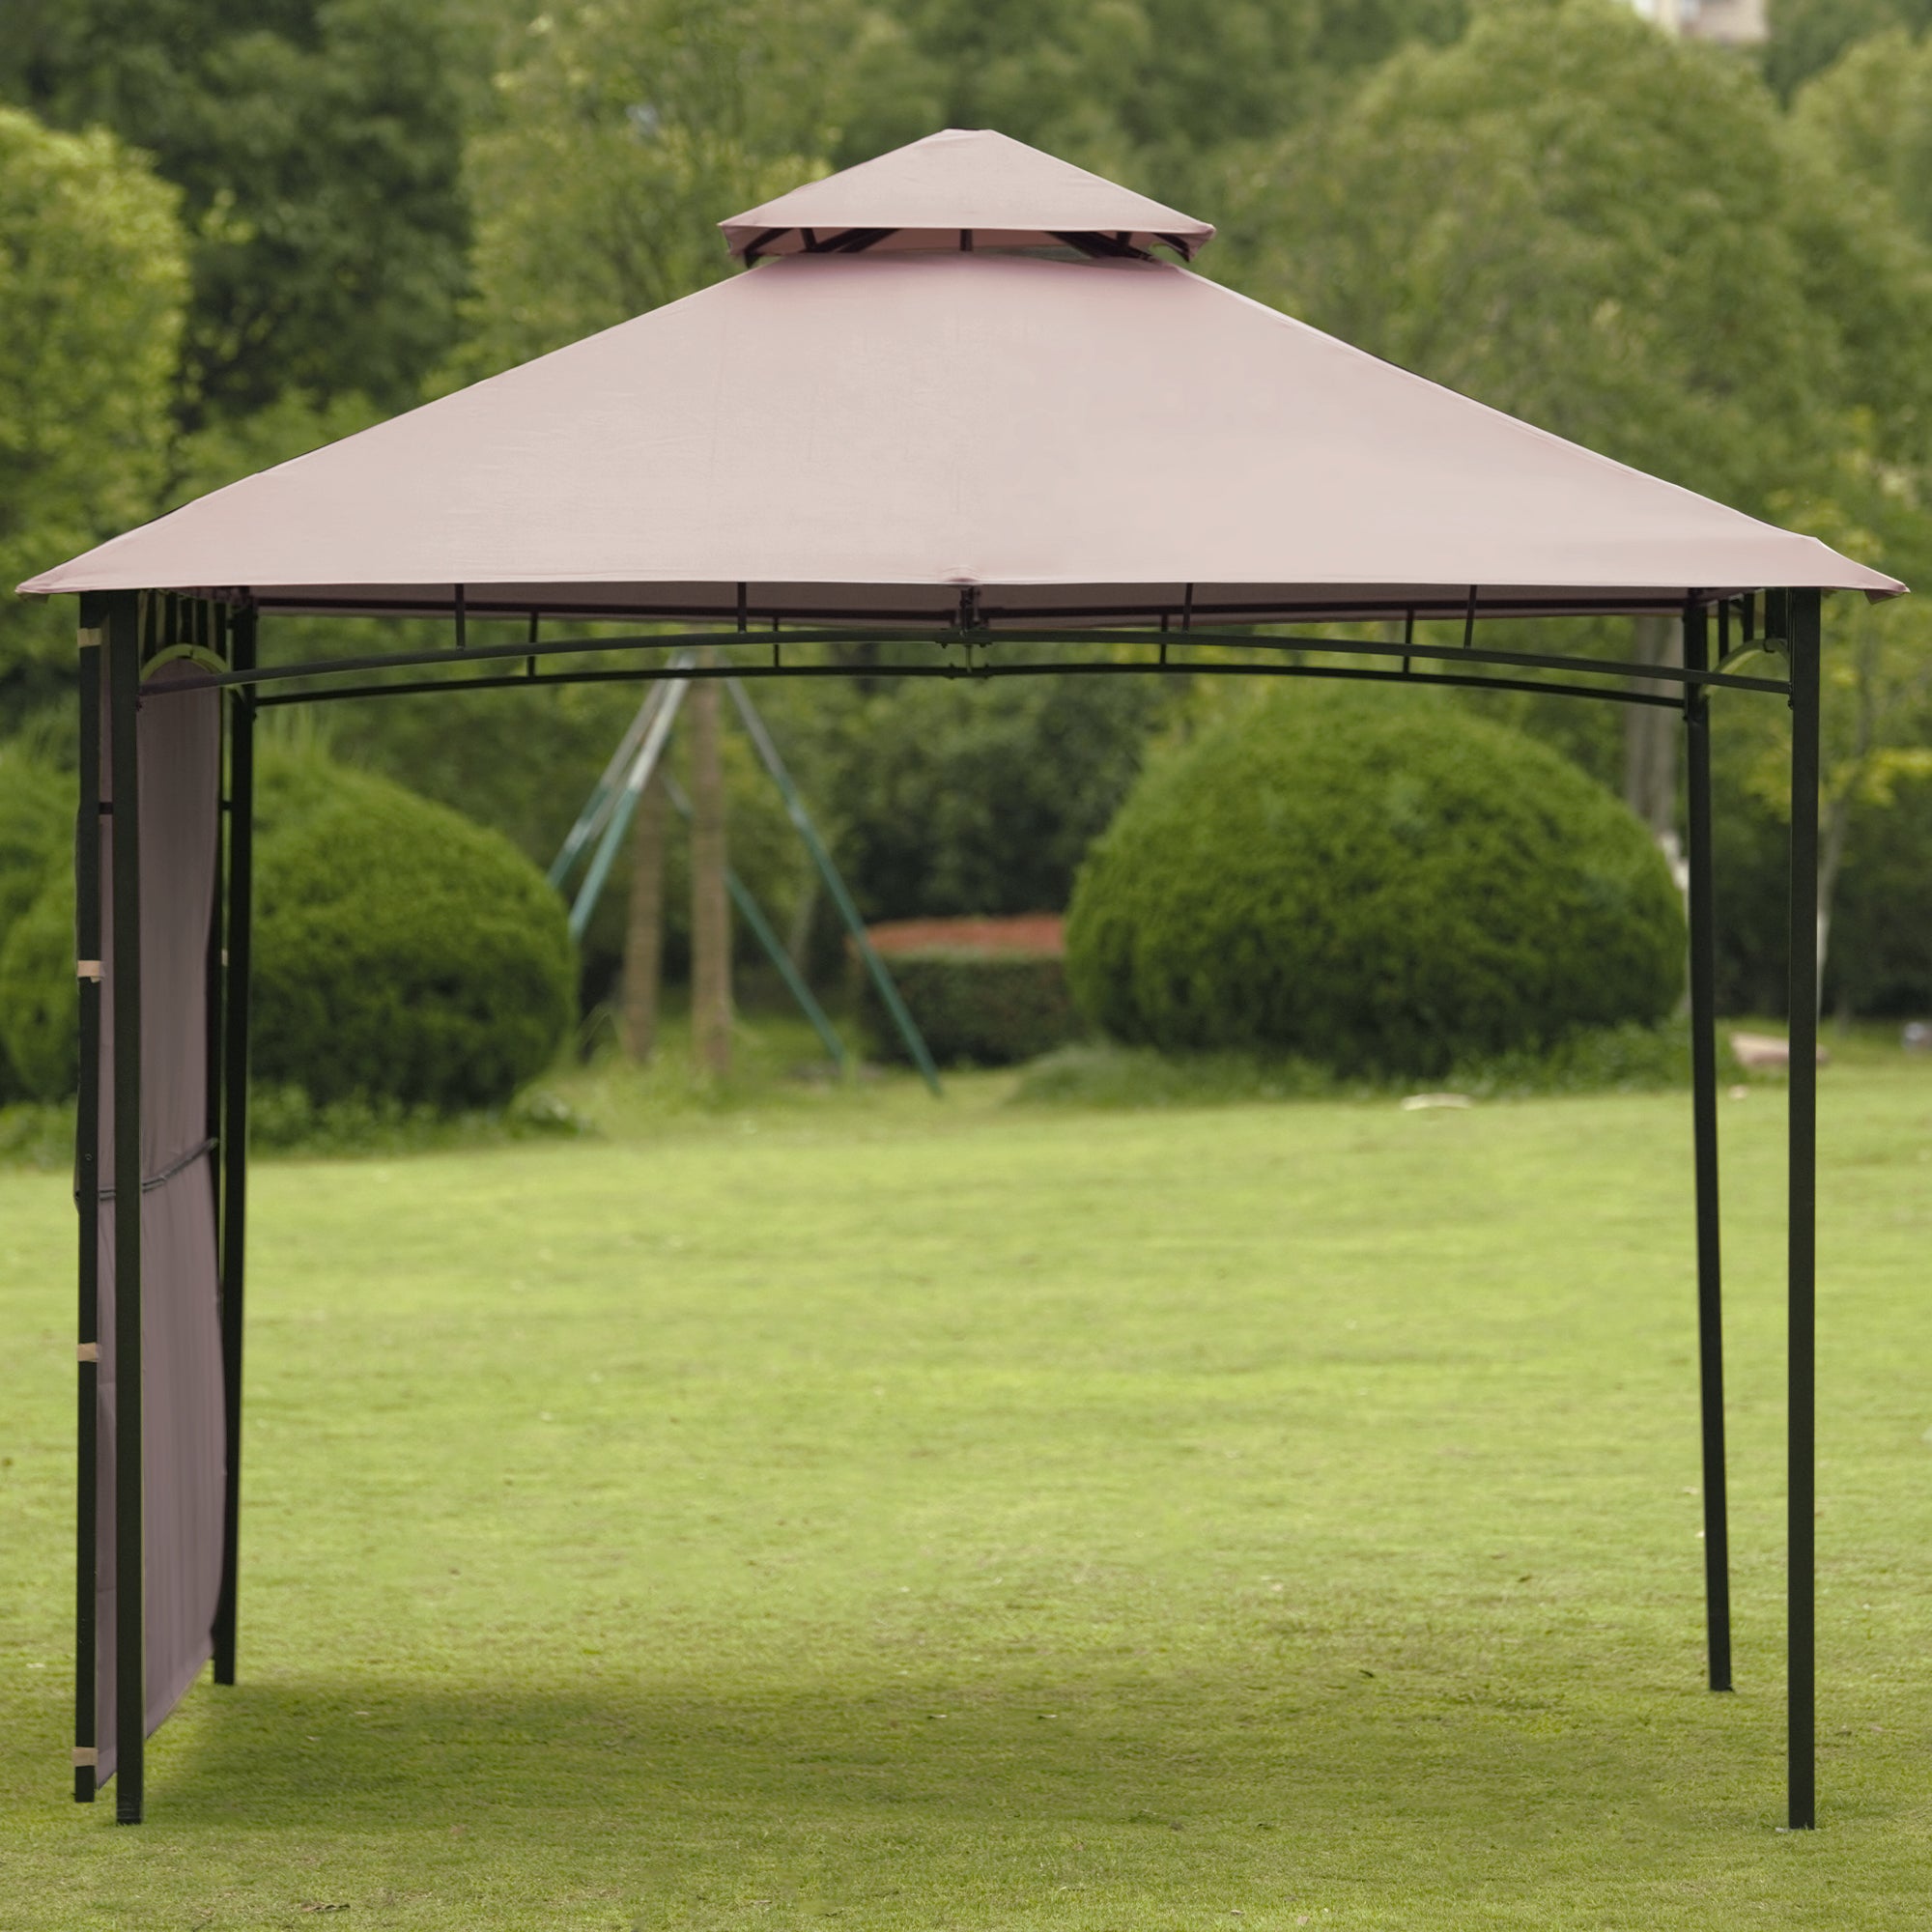 Clihome® | Outdoor Gazebo Easy Assembly Seasonal Shade UV Protection with Extendable Awning